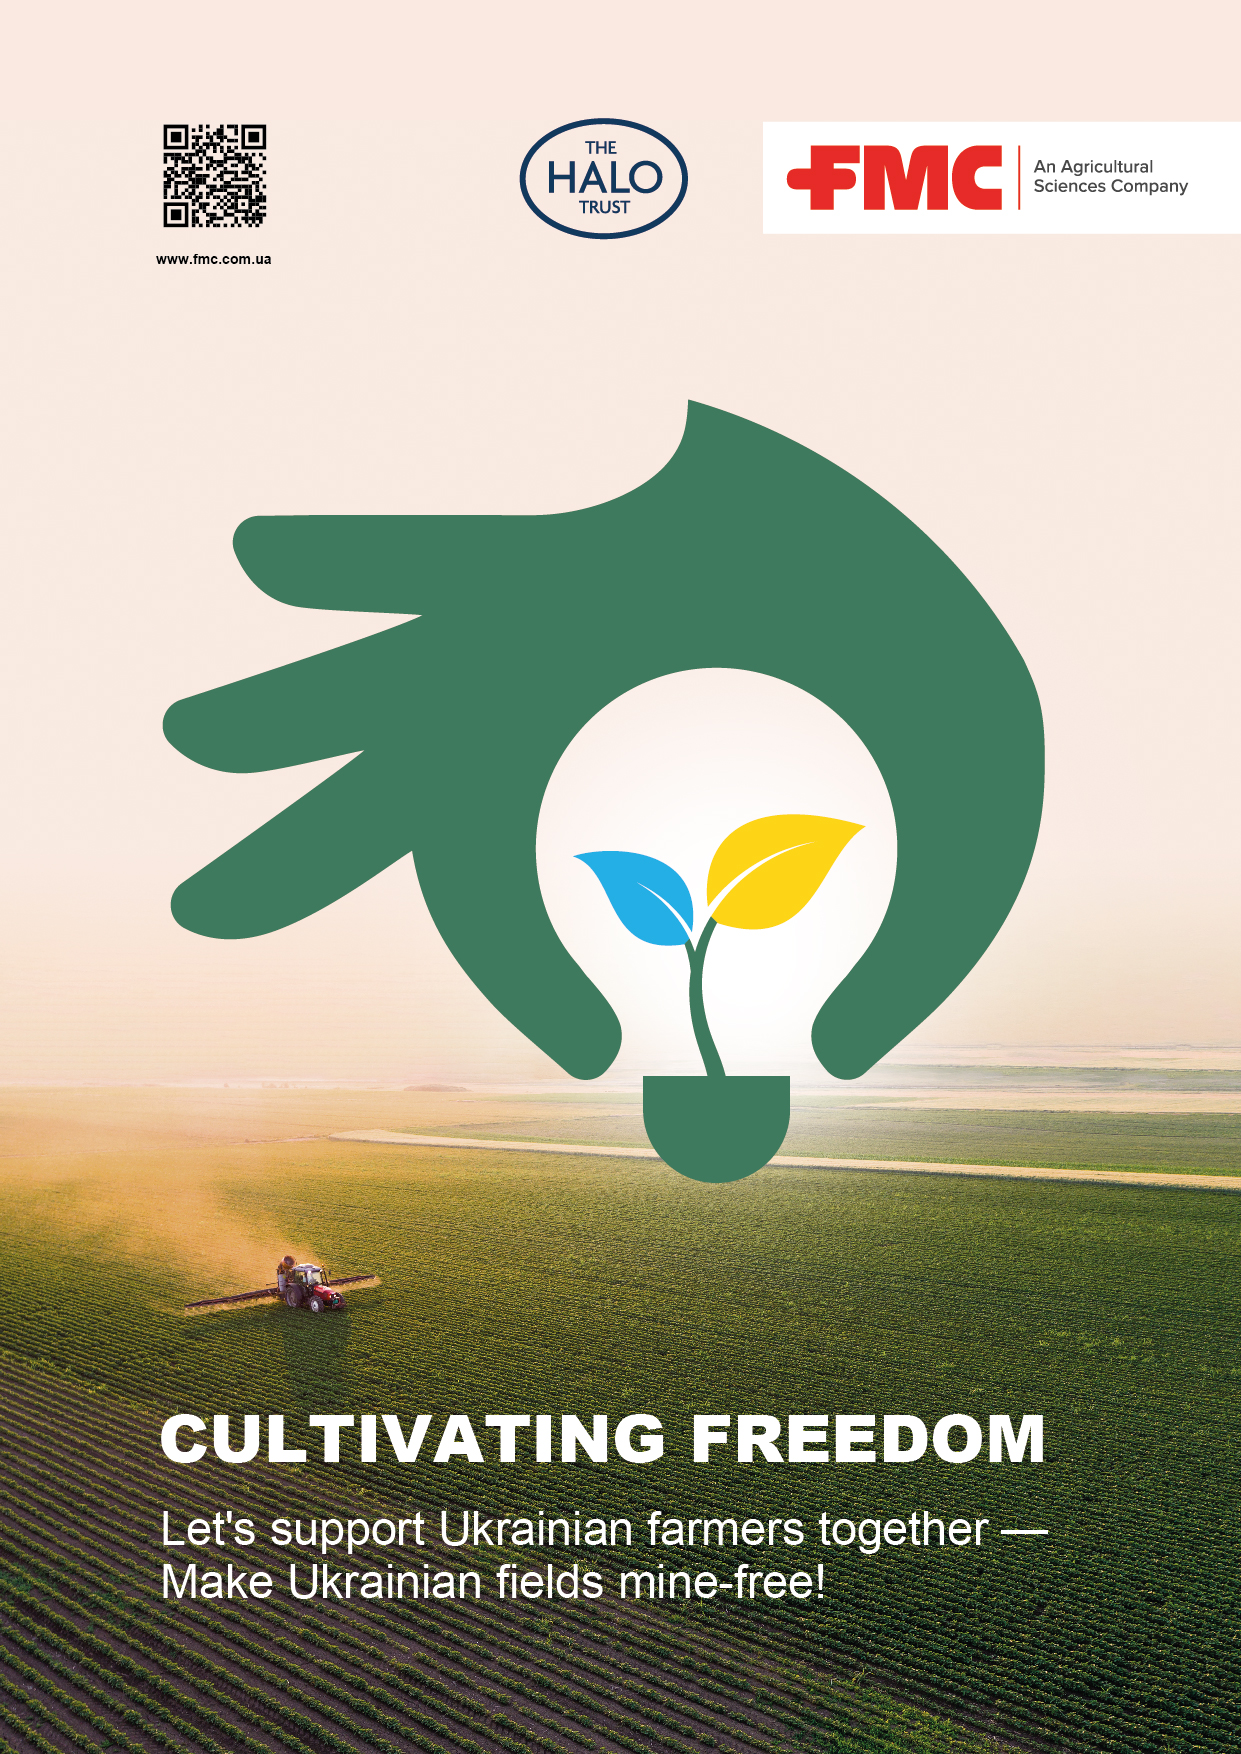 Cultivating Freedom campaign